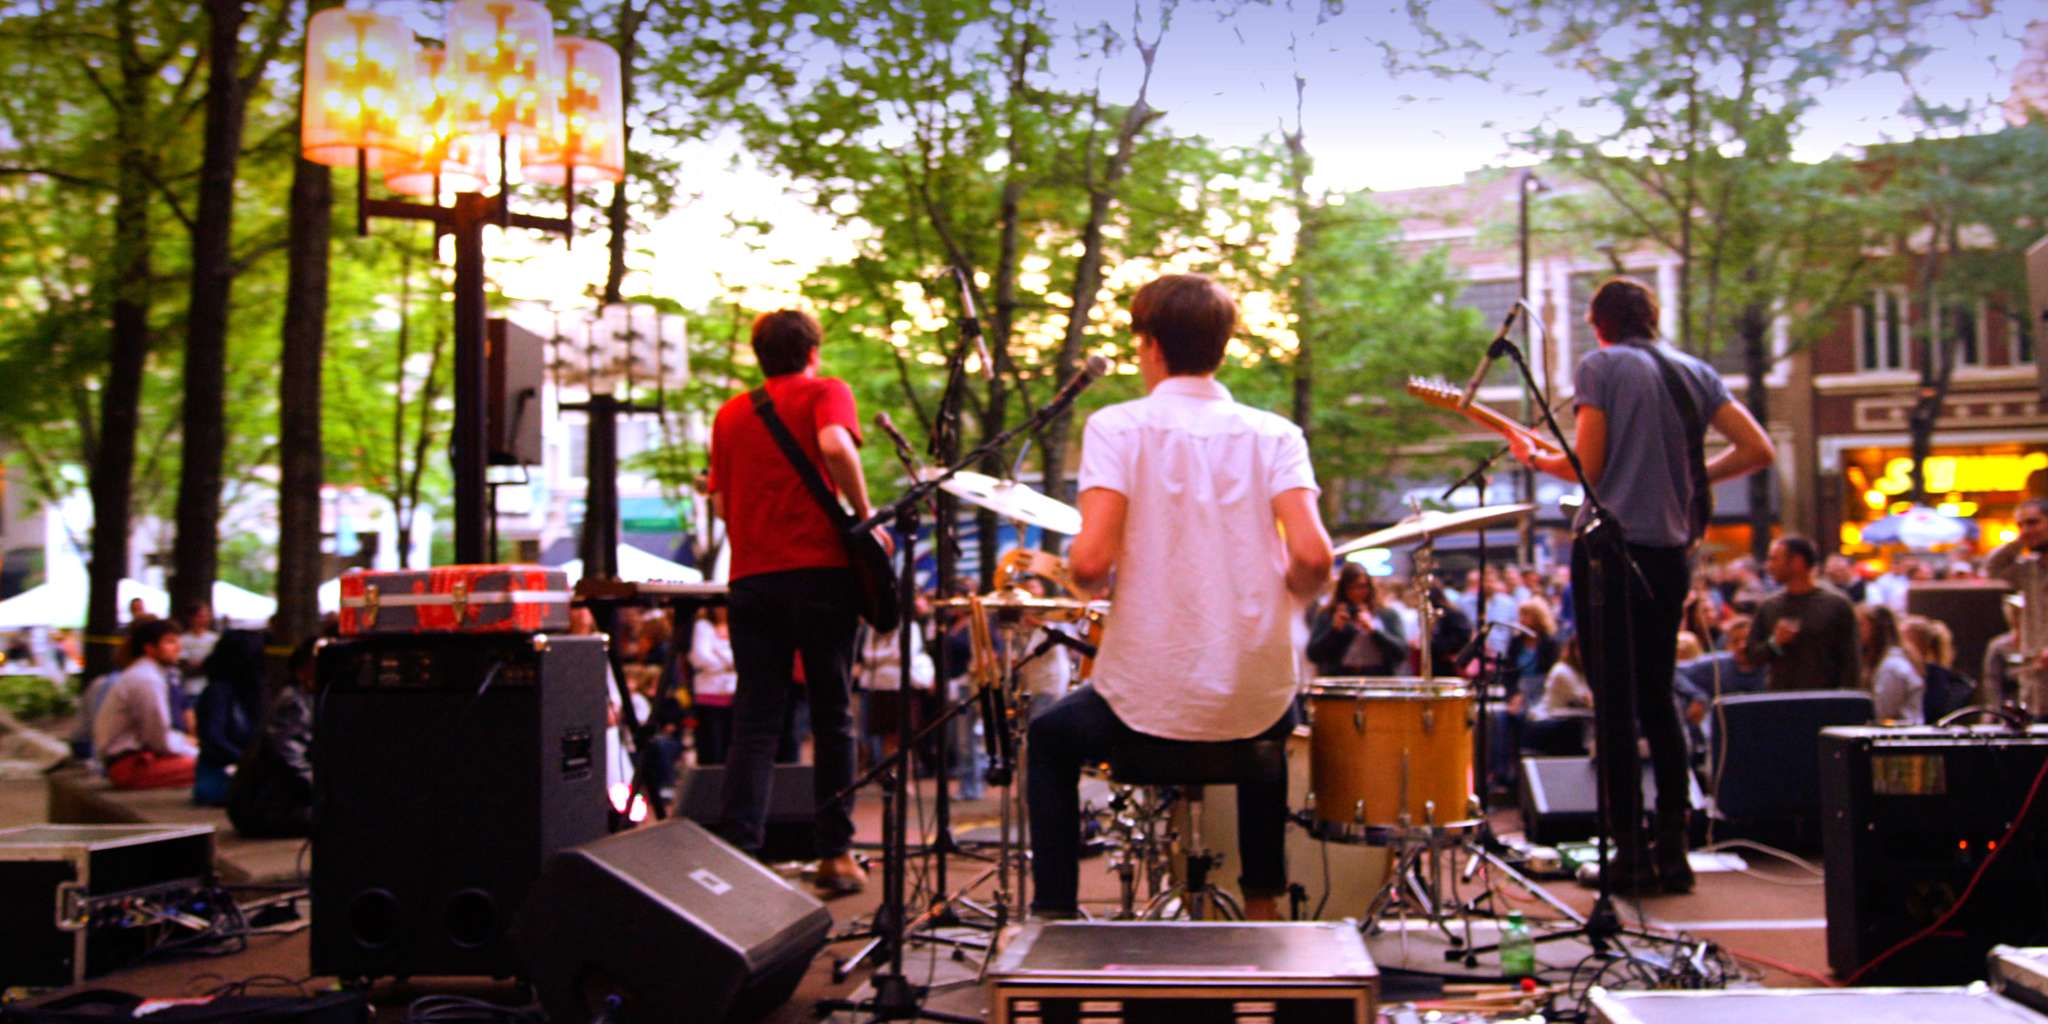 Live music can be enjoyed outdoors frequently in downtown Greenville.